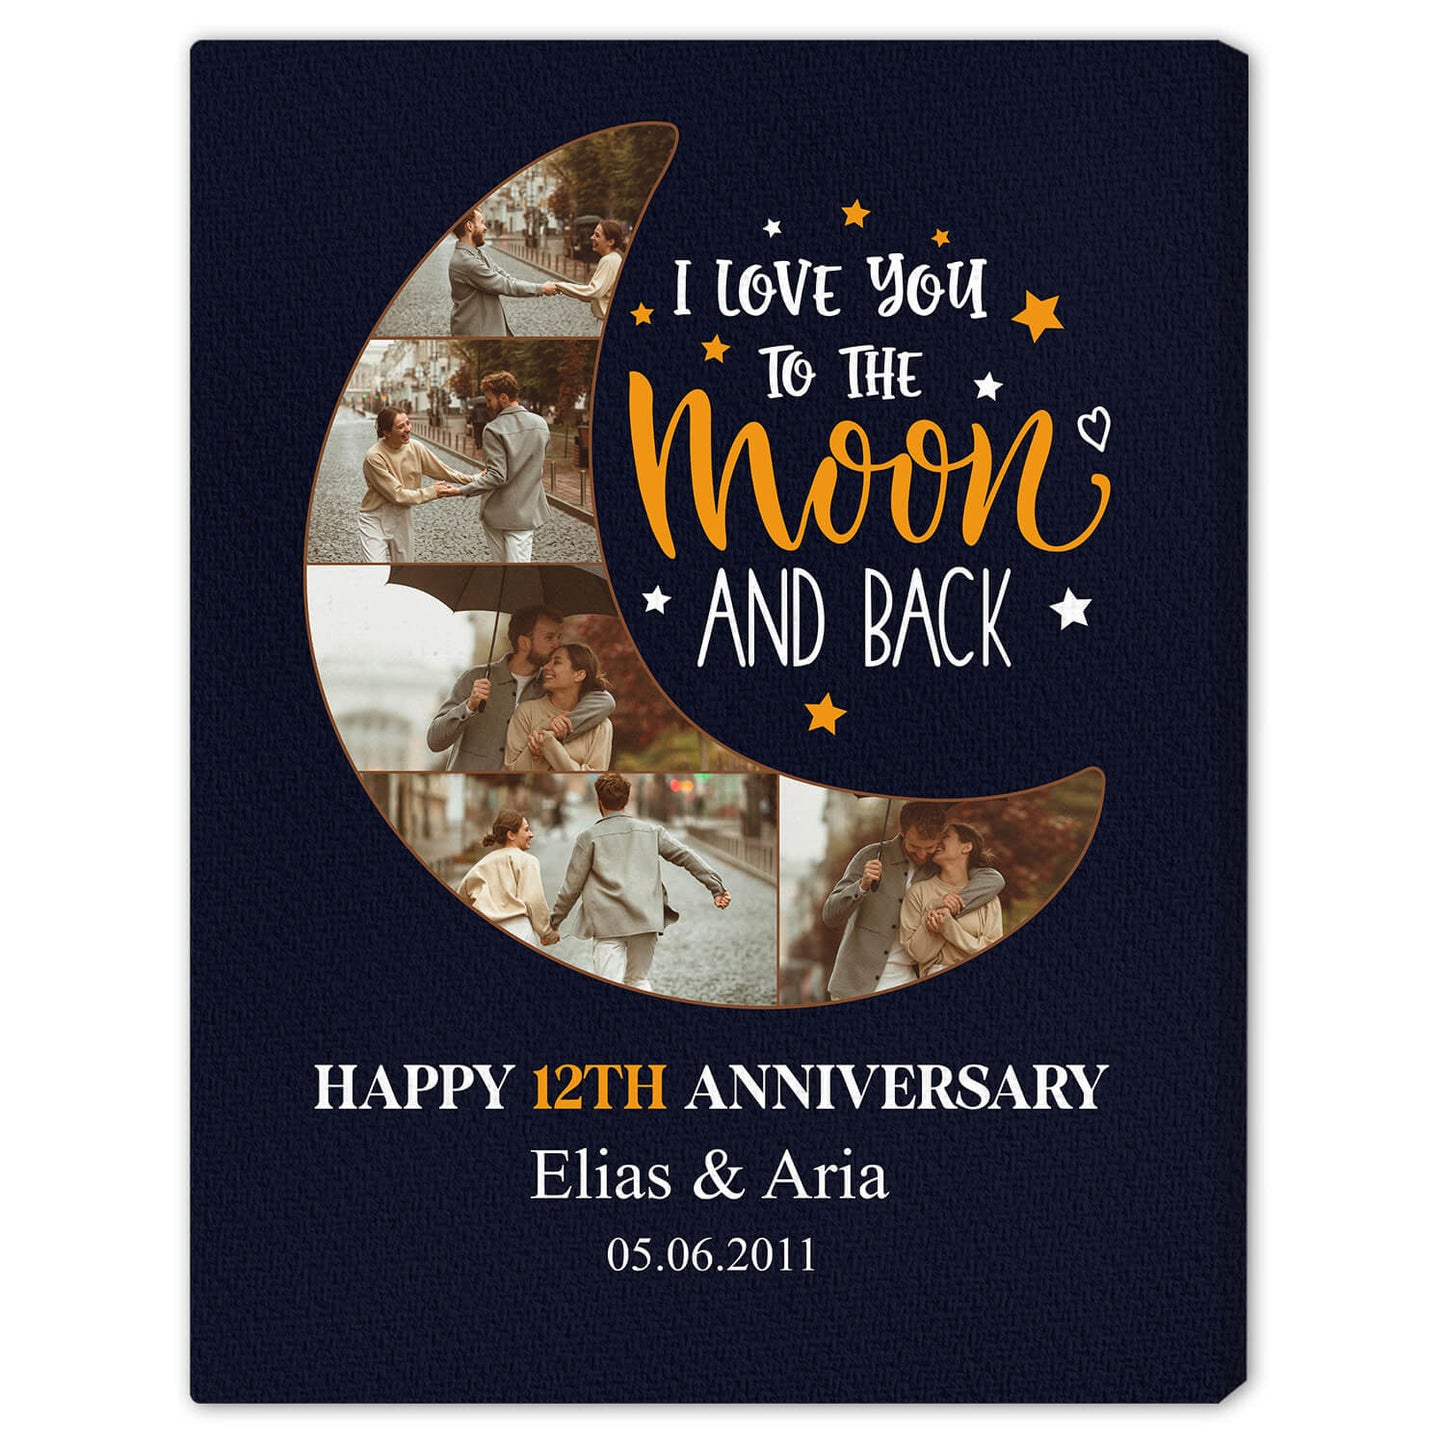 I Love You To The Moon - Personalized 12 Year Anniversary gift For Husband or Wife - Custom Canvas Print - MyMindfulGifts